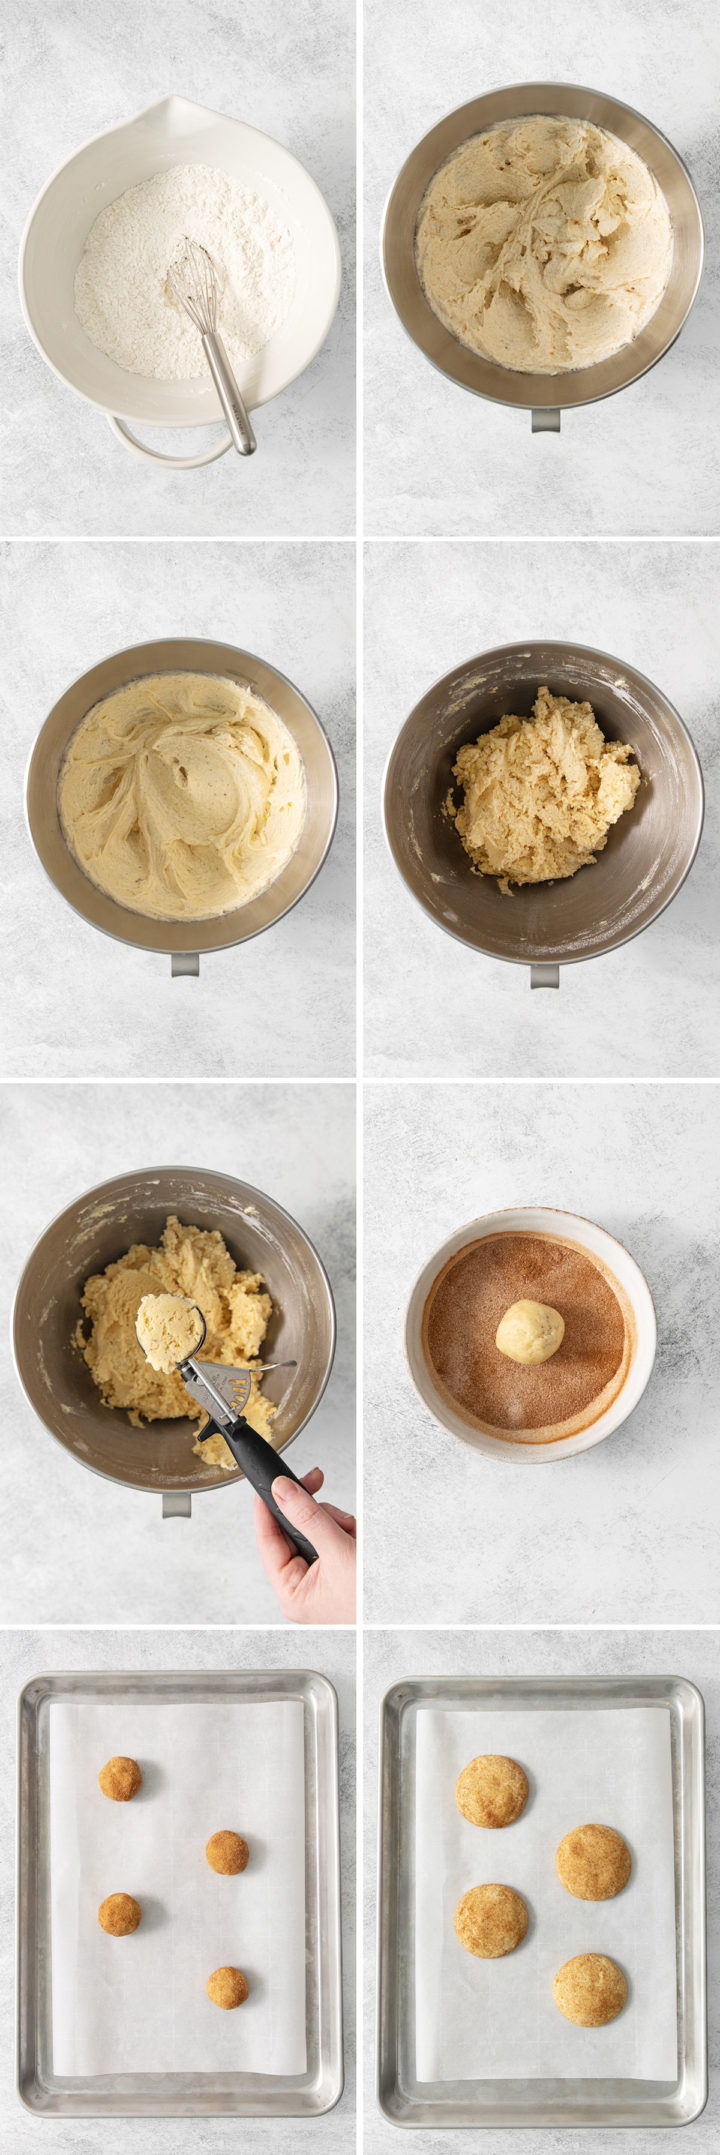 step by step how to make brown butter snickerdoodle recipe
